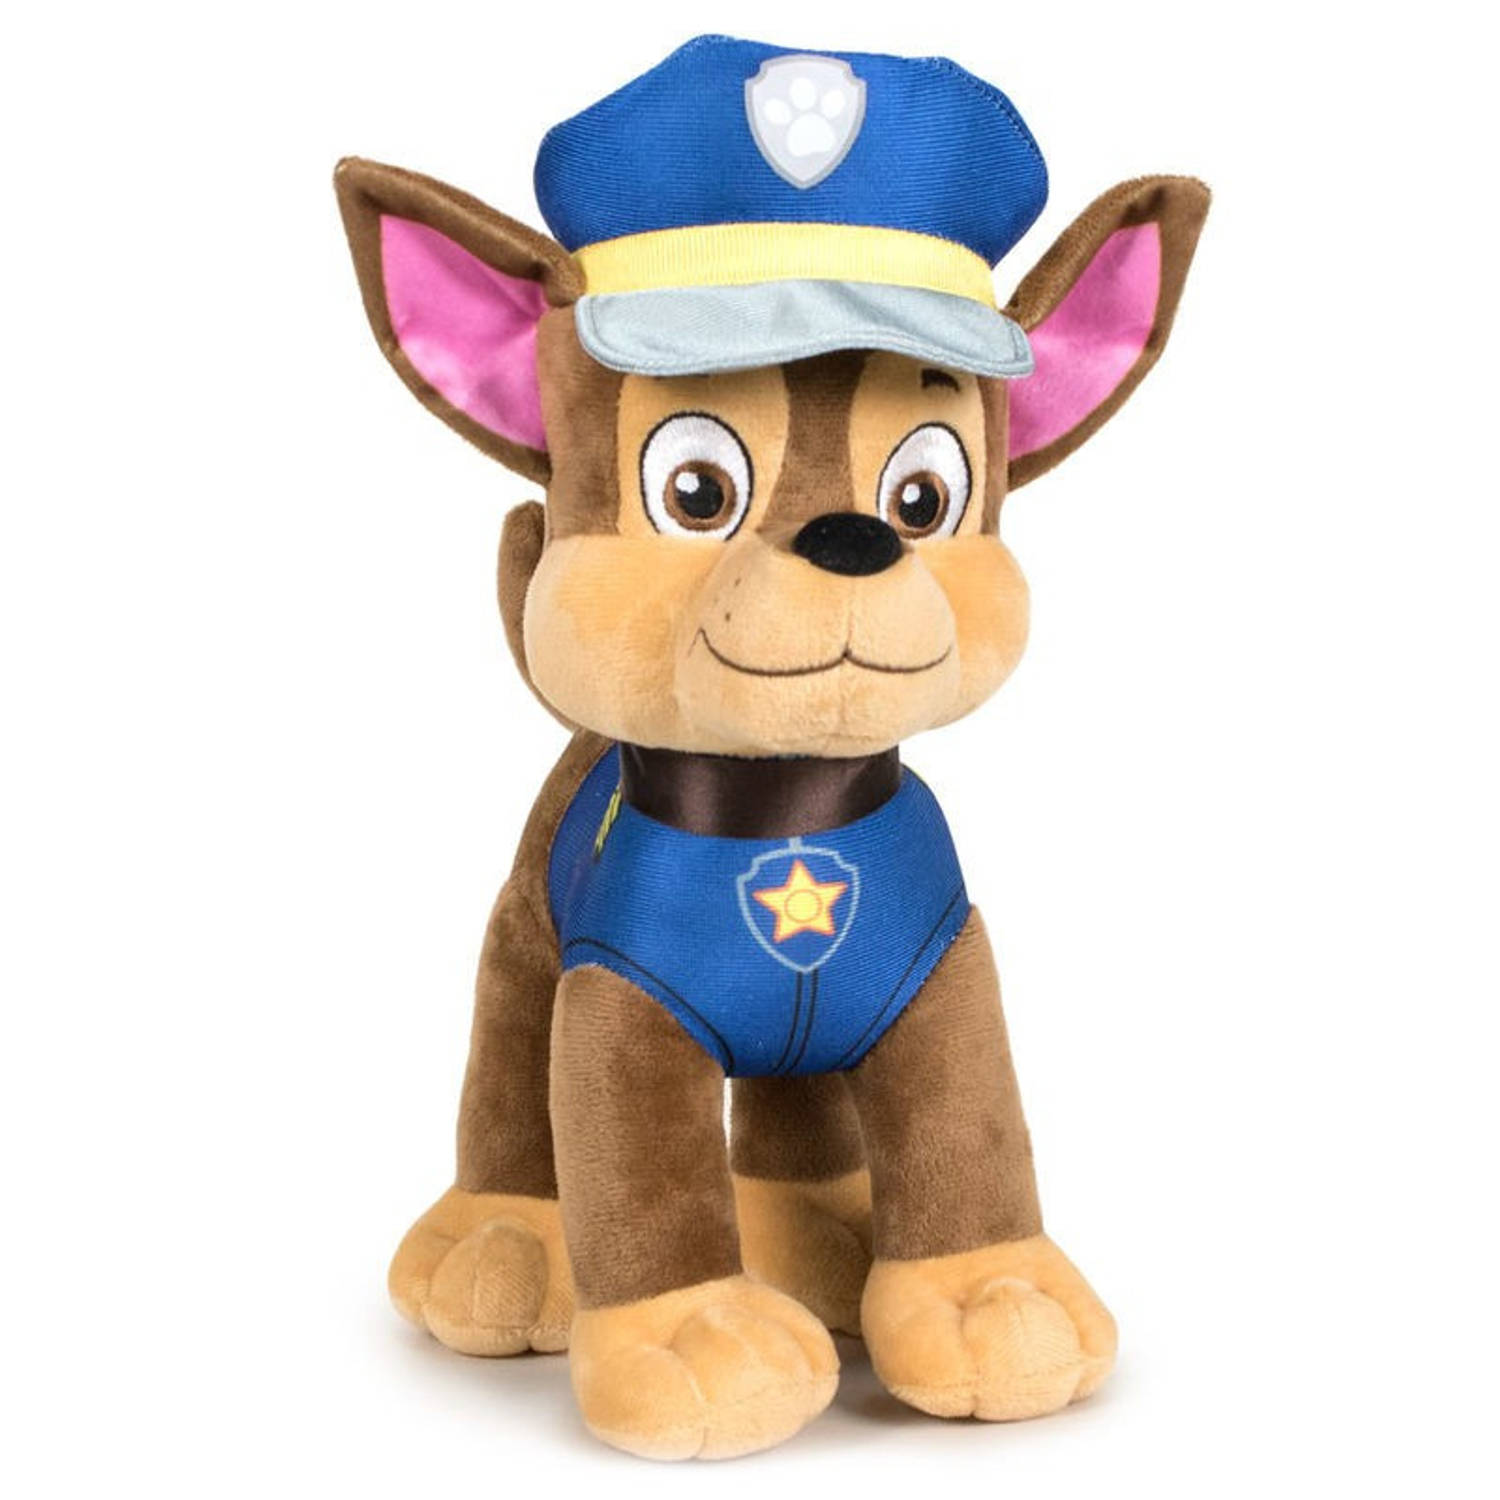 Paw Patrol Pluche Knuffel Chase - Classic New Style - 27 Cm - Cartoon Knuffels - Speelgoed Voor Kinderen